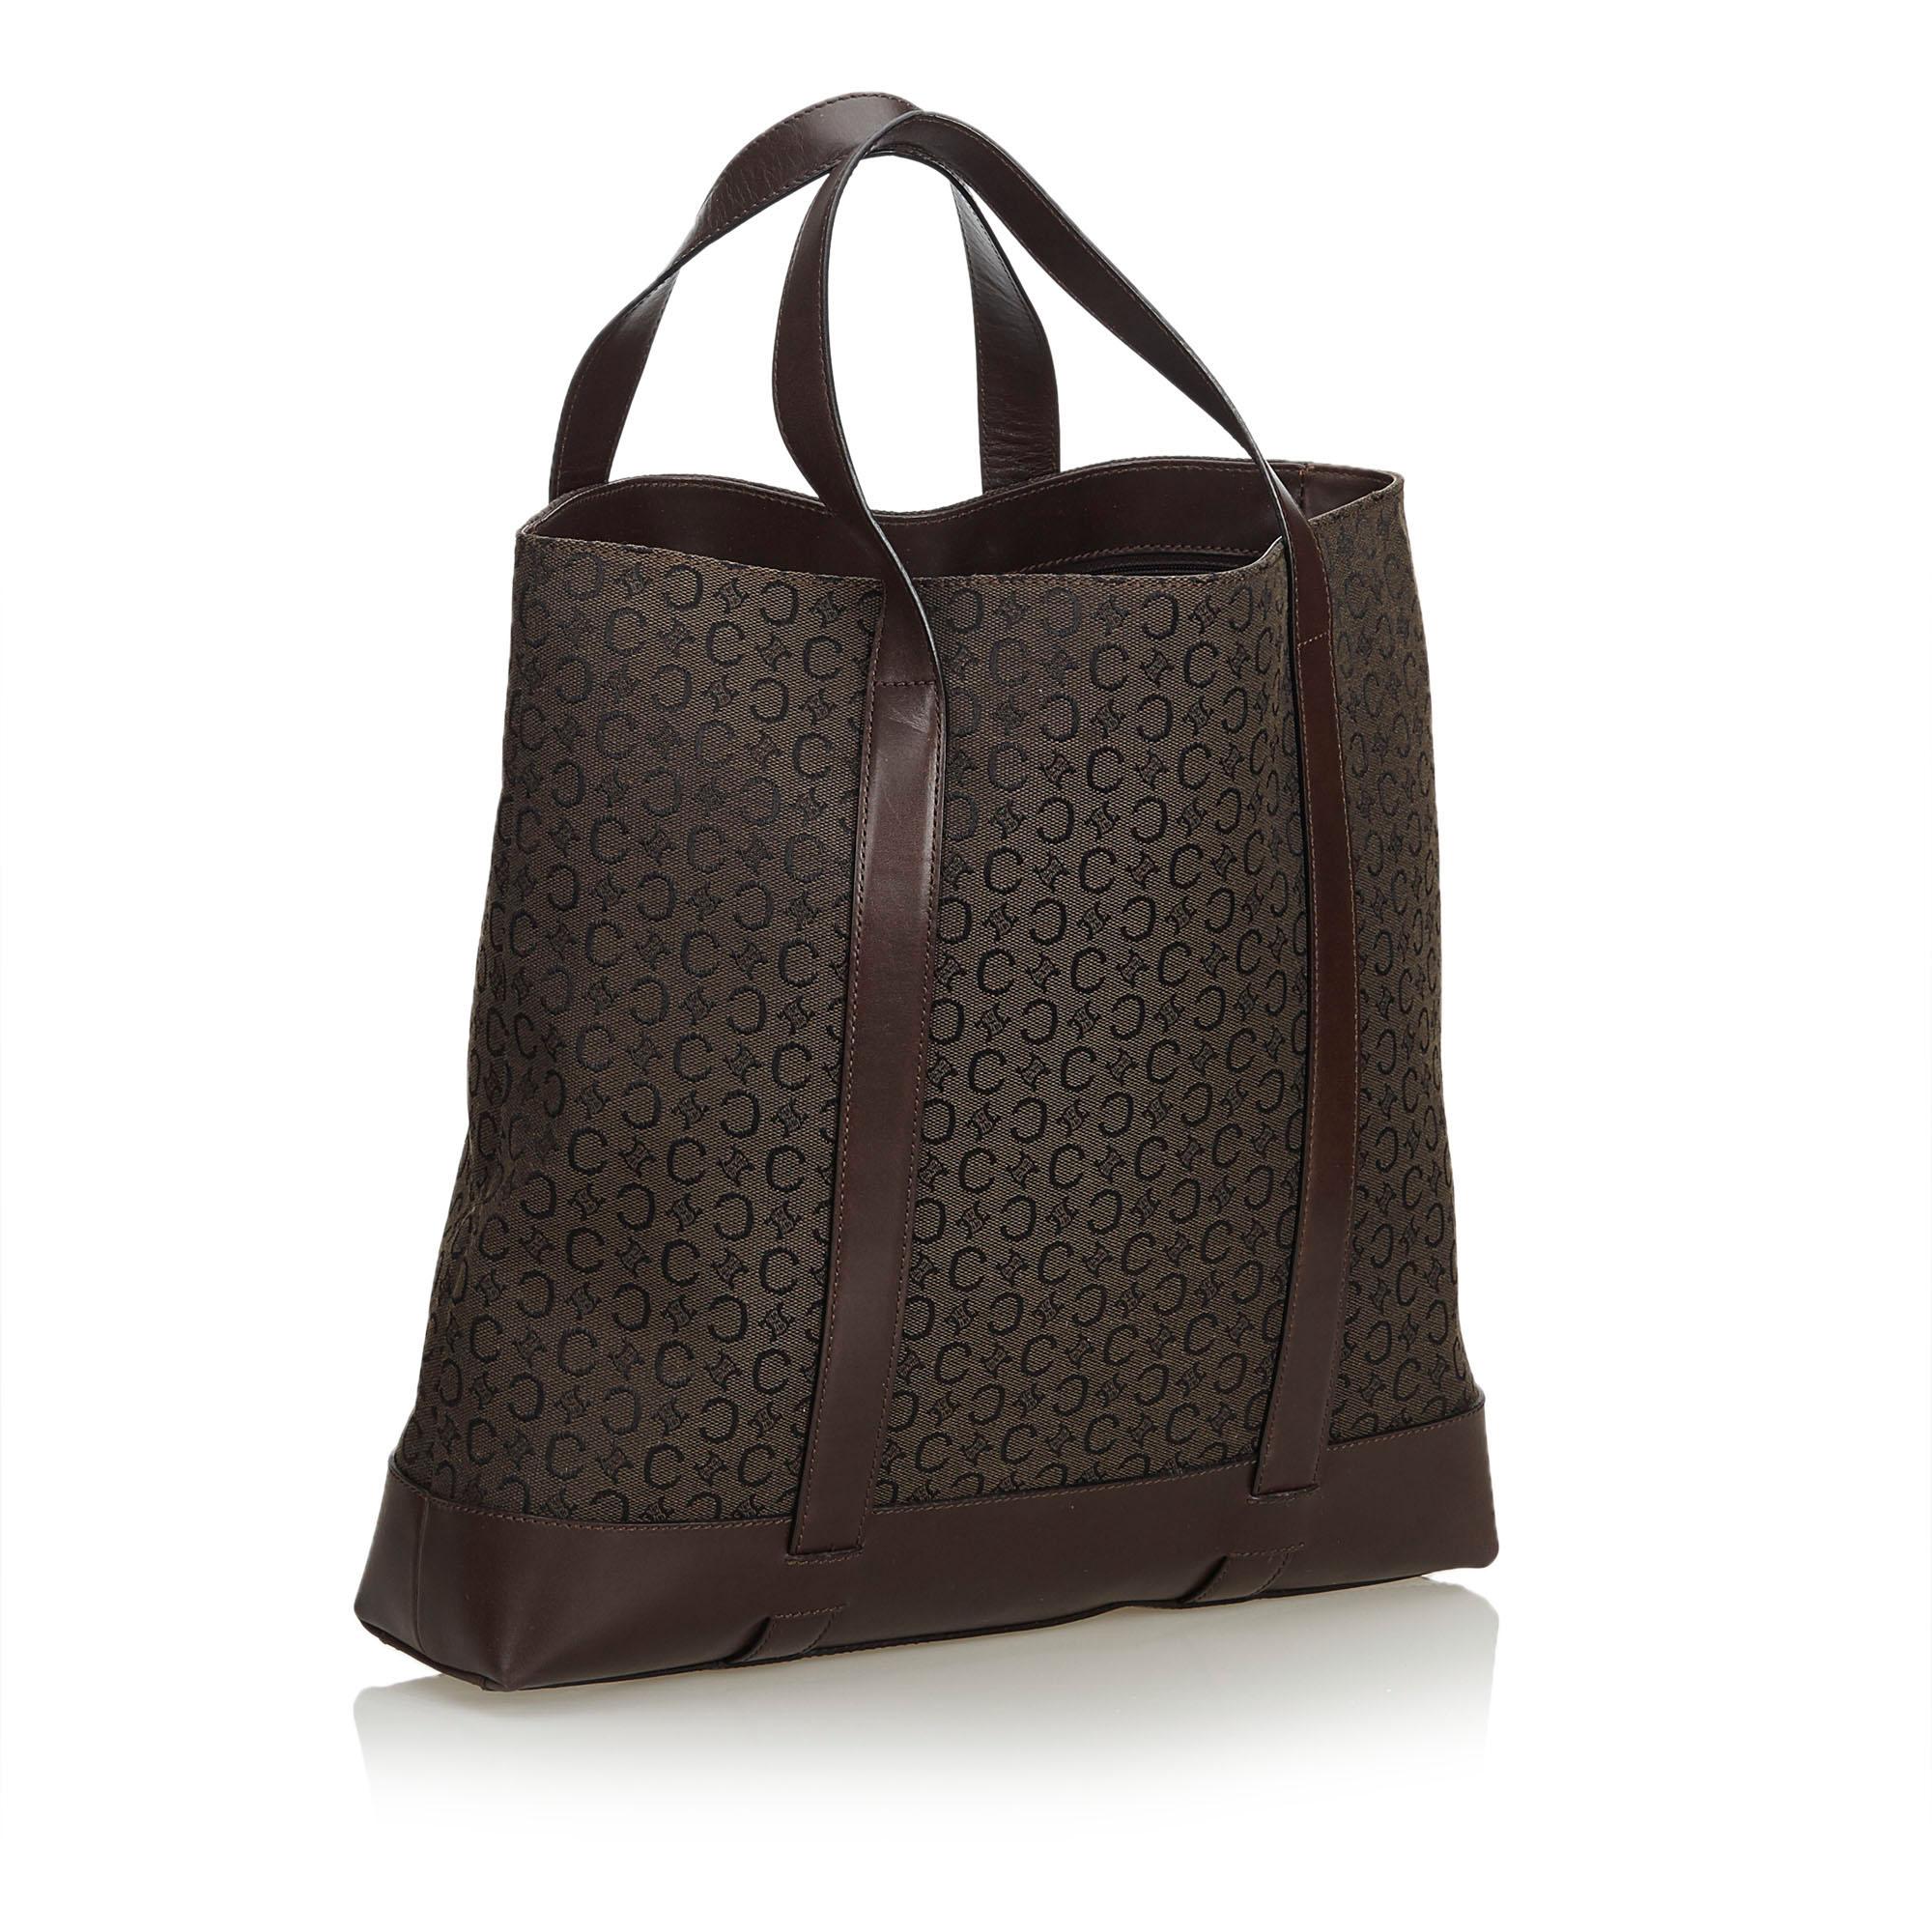 This tote bag features a jacquard body, flat leather straps, an open top, interior zip and slip pockets. It carries as B+ condition rating.

Inclusions: 
Dust Bag

Dimensions:
Length: 26.00 cm
Width: 41.00 cm
Depth: 10.00 cm
Hand Drop: 14.00